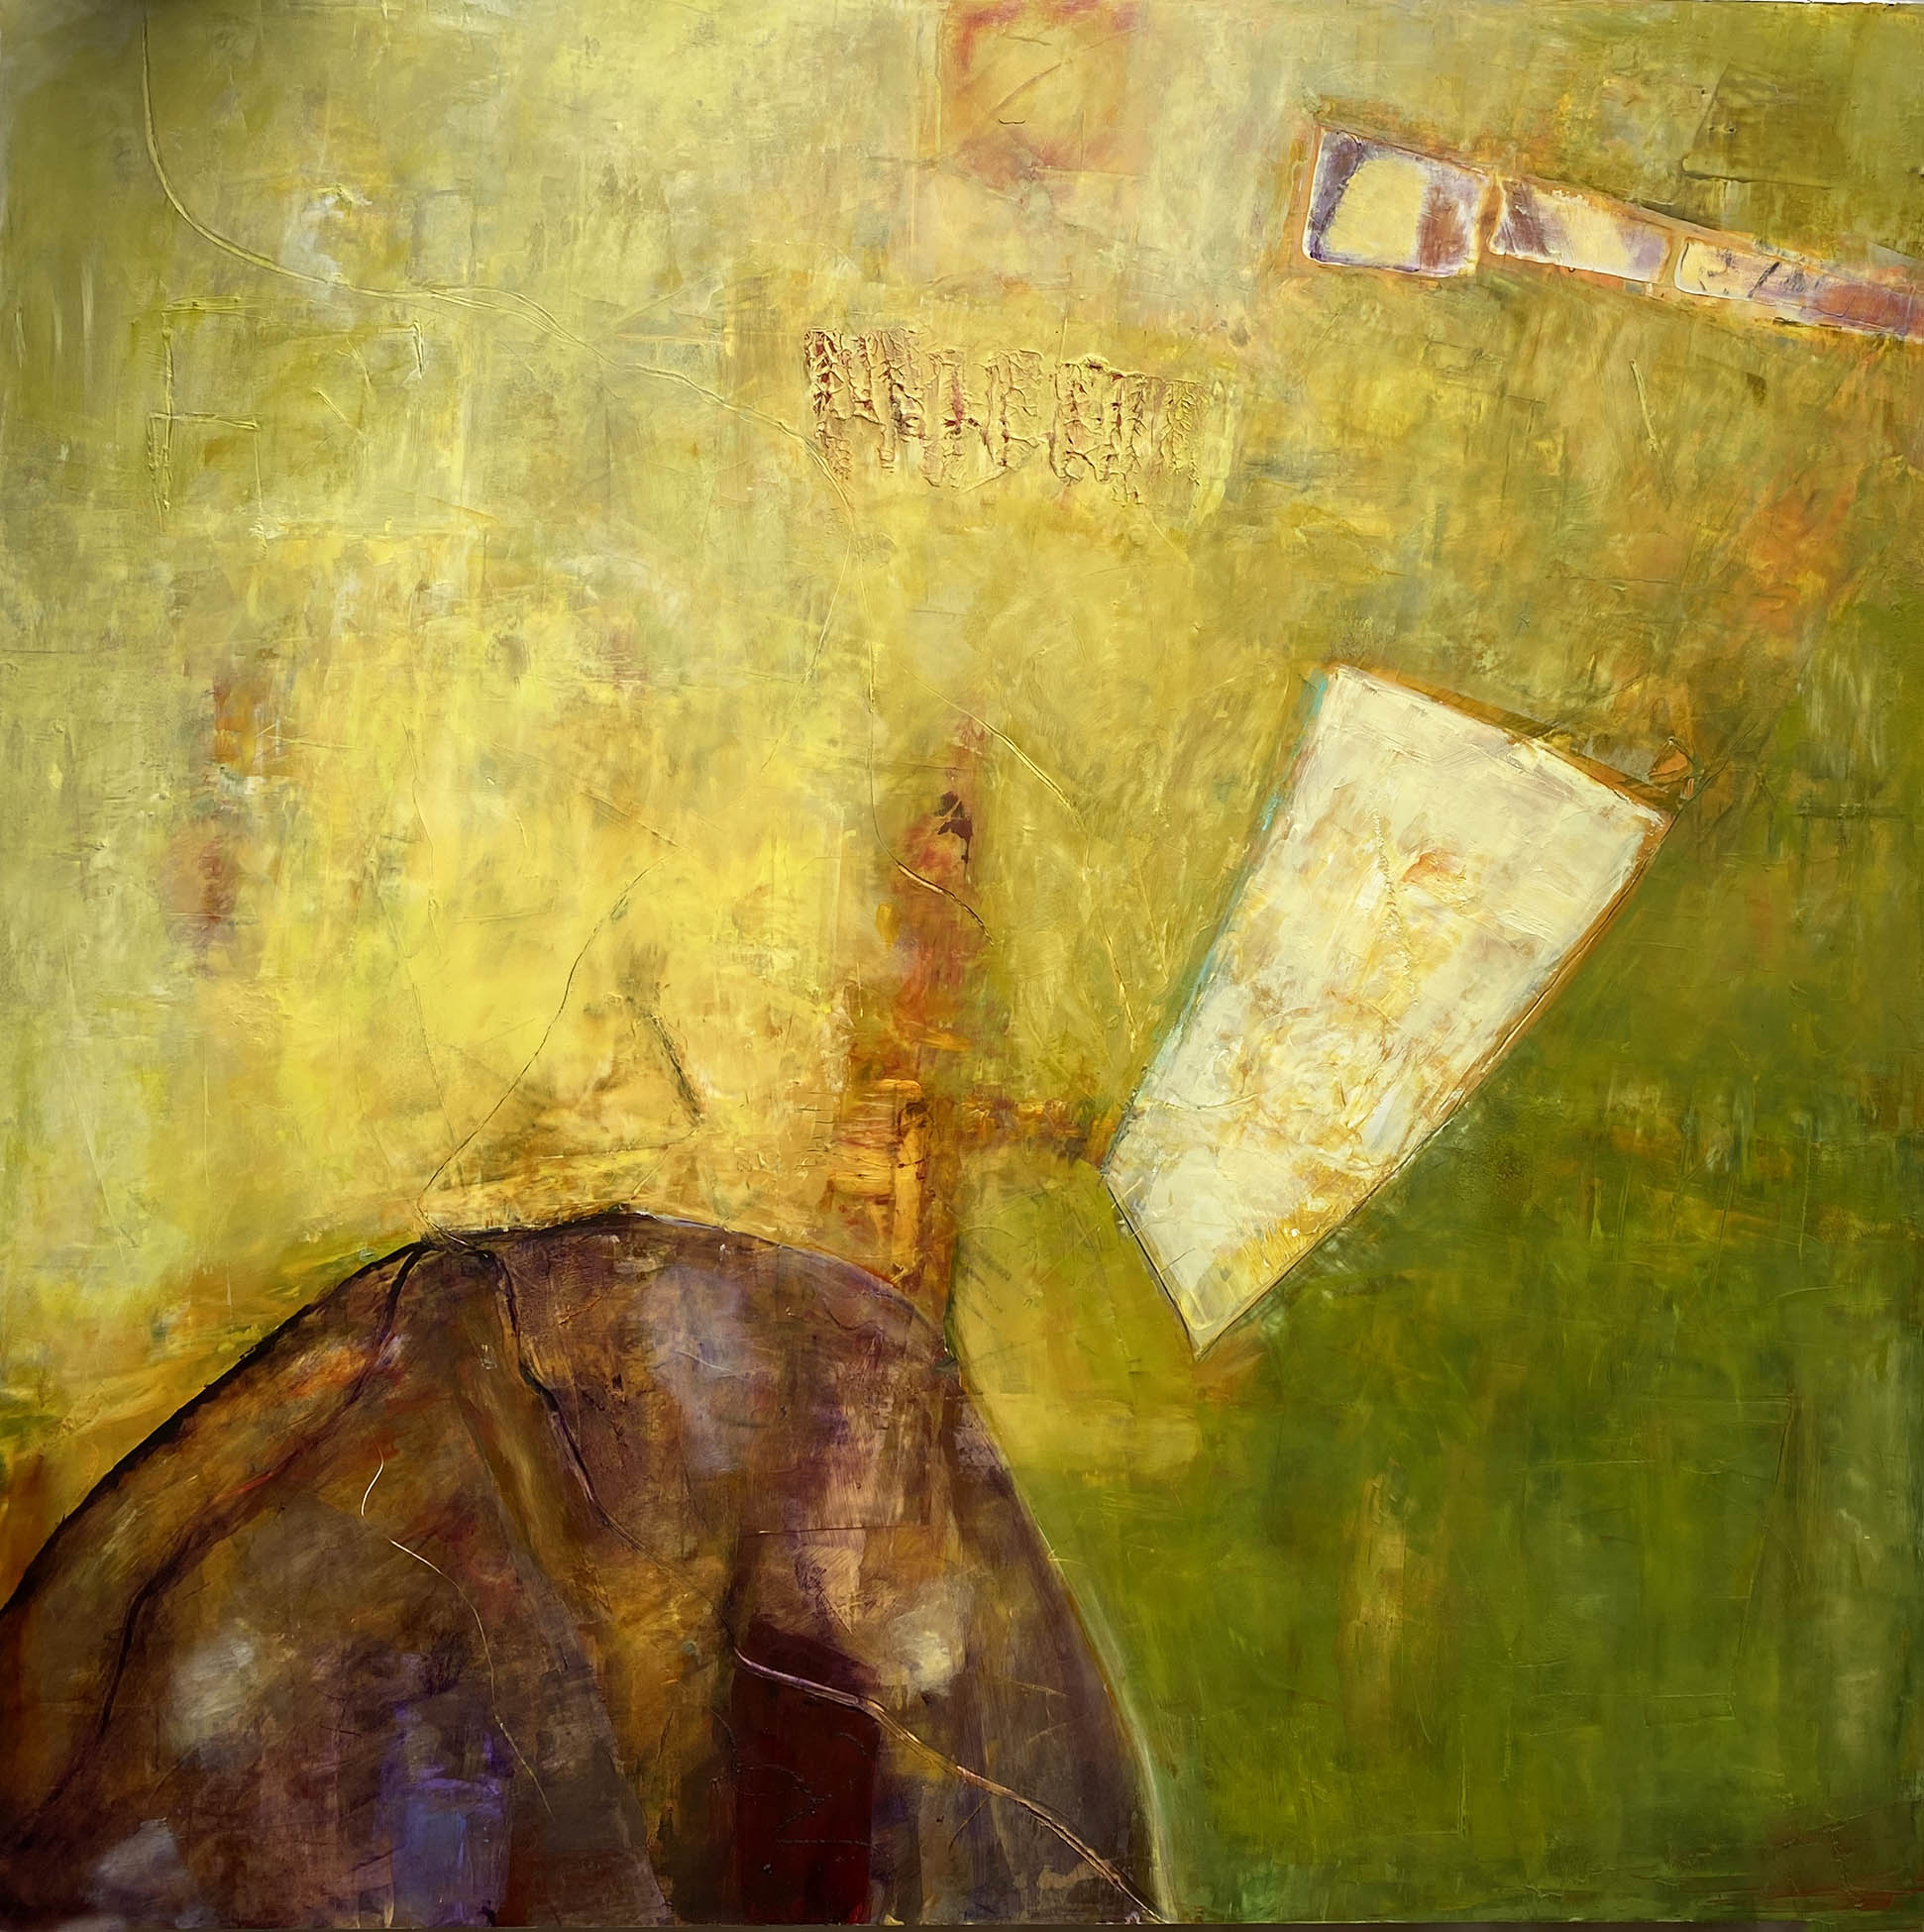 the big book<br>30" x 30" | oil & cold wax on wood panel